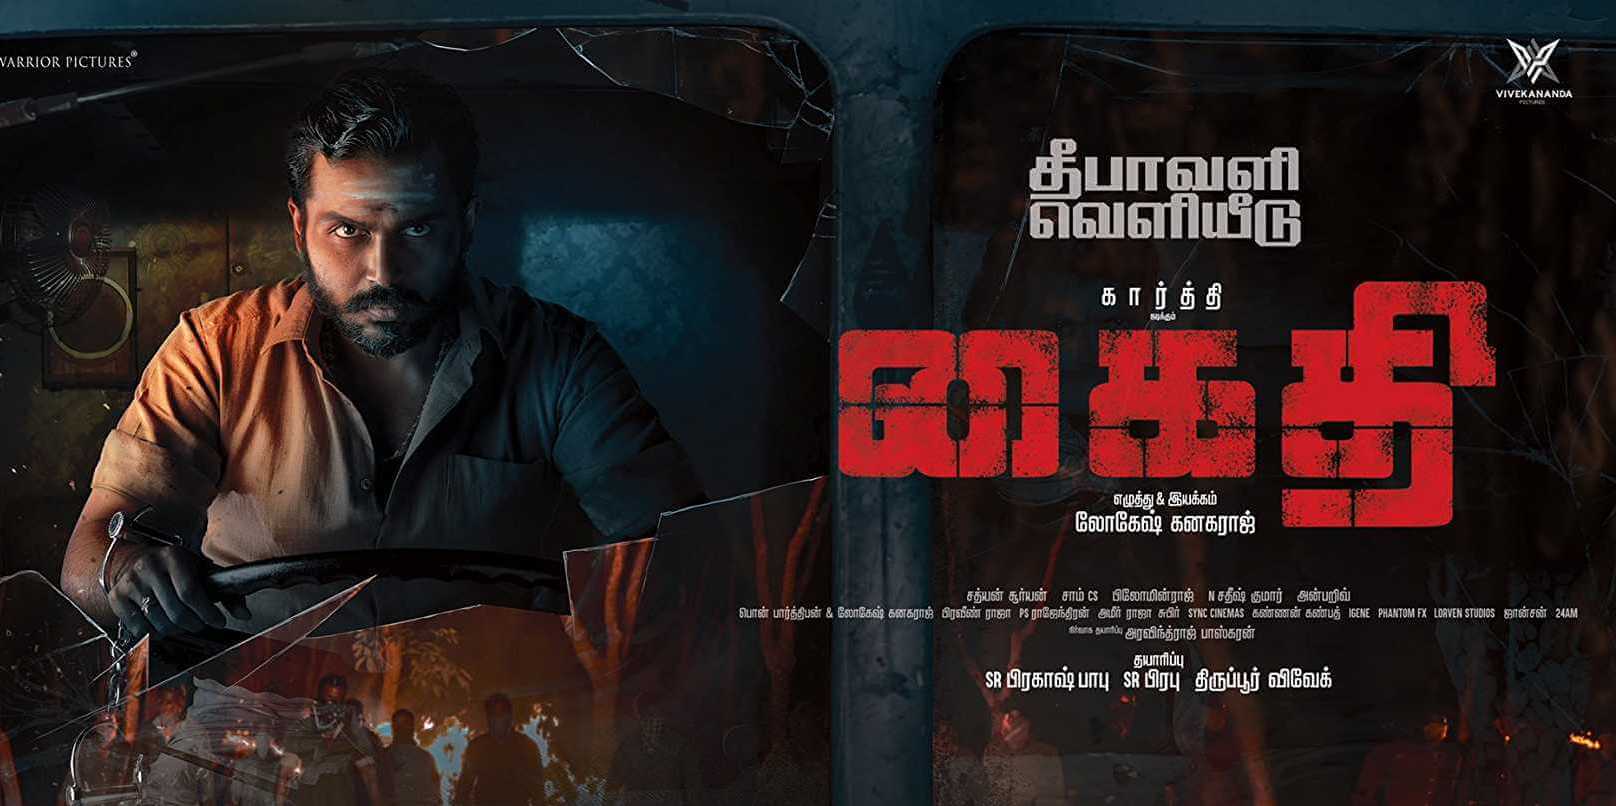 Kaithi Movie Reviews and Ratings